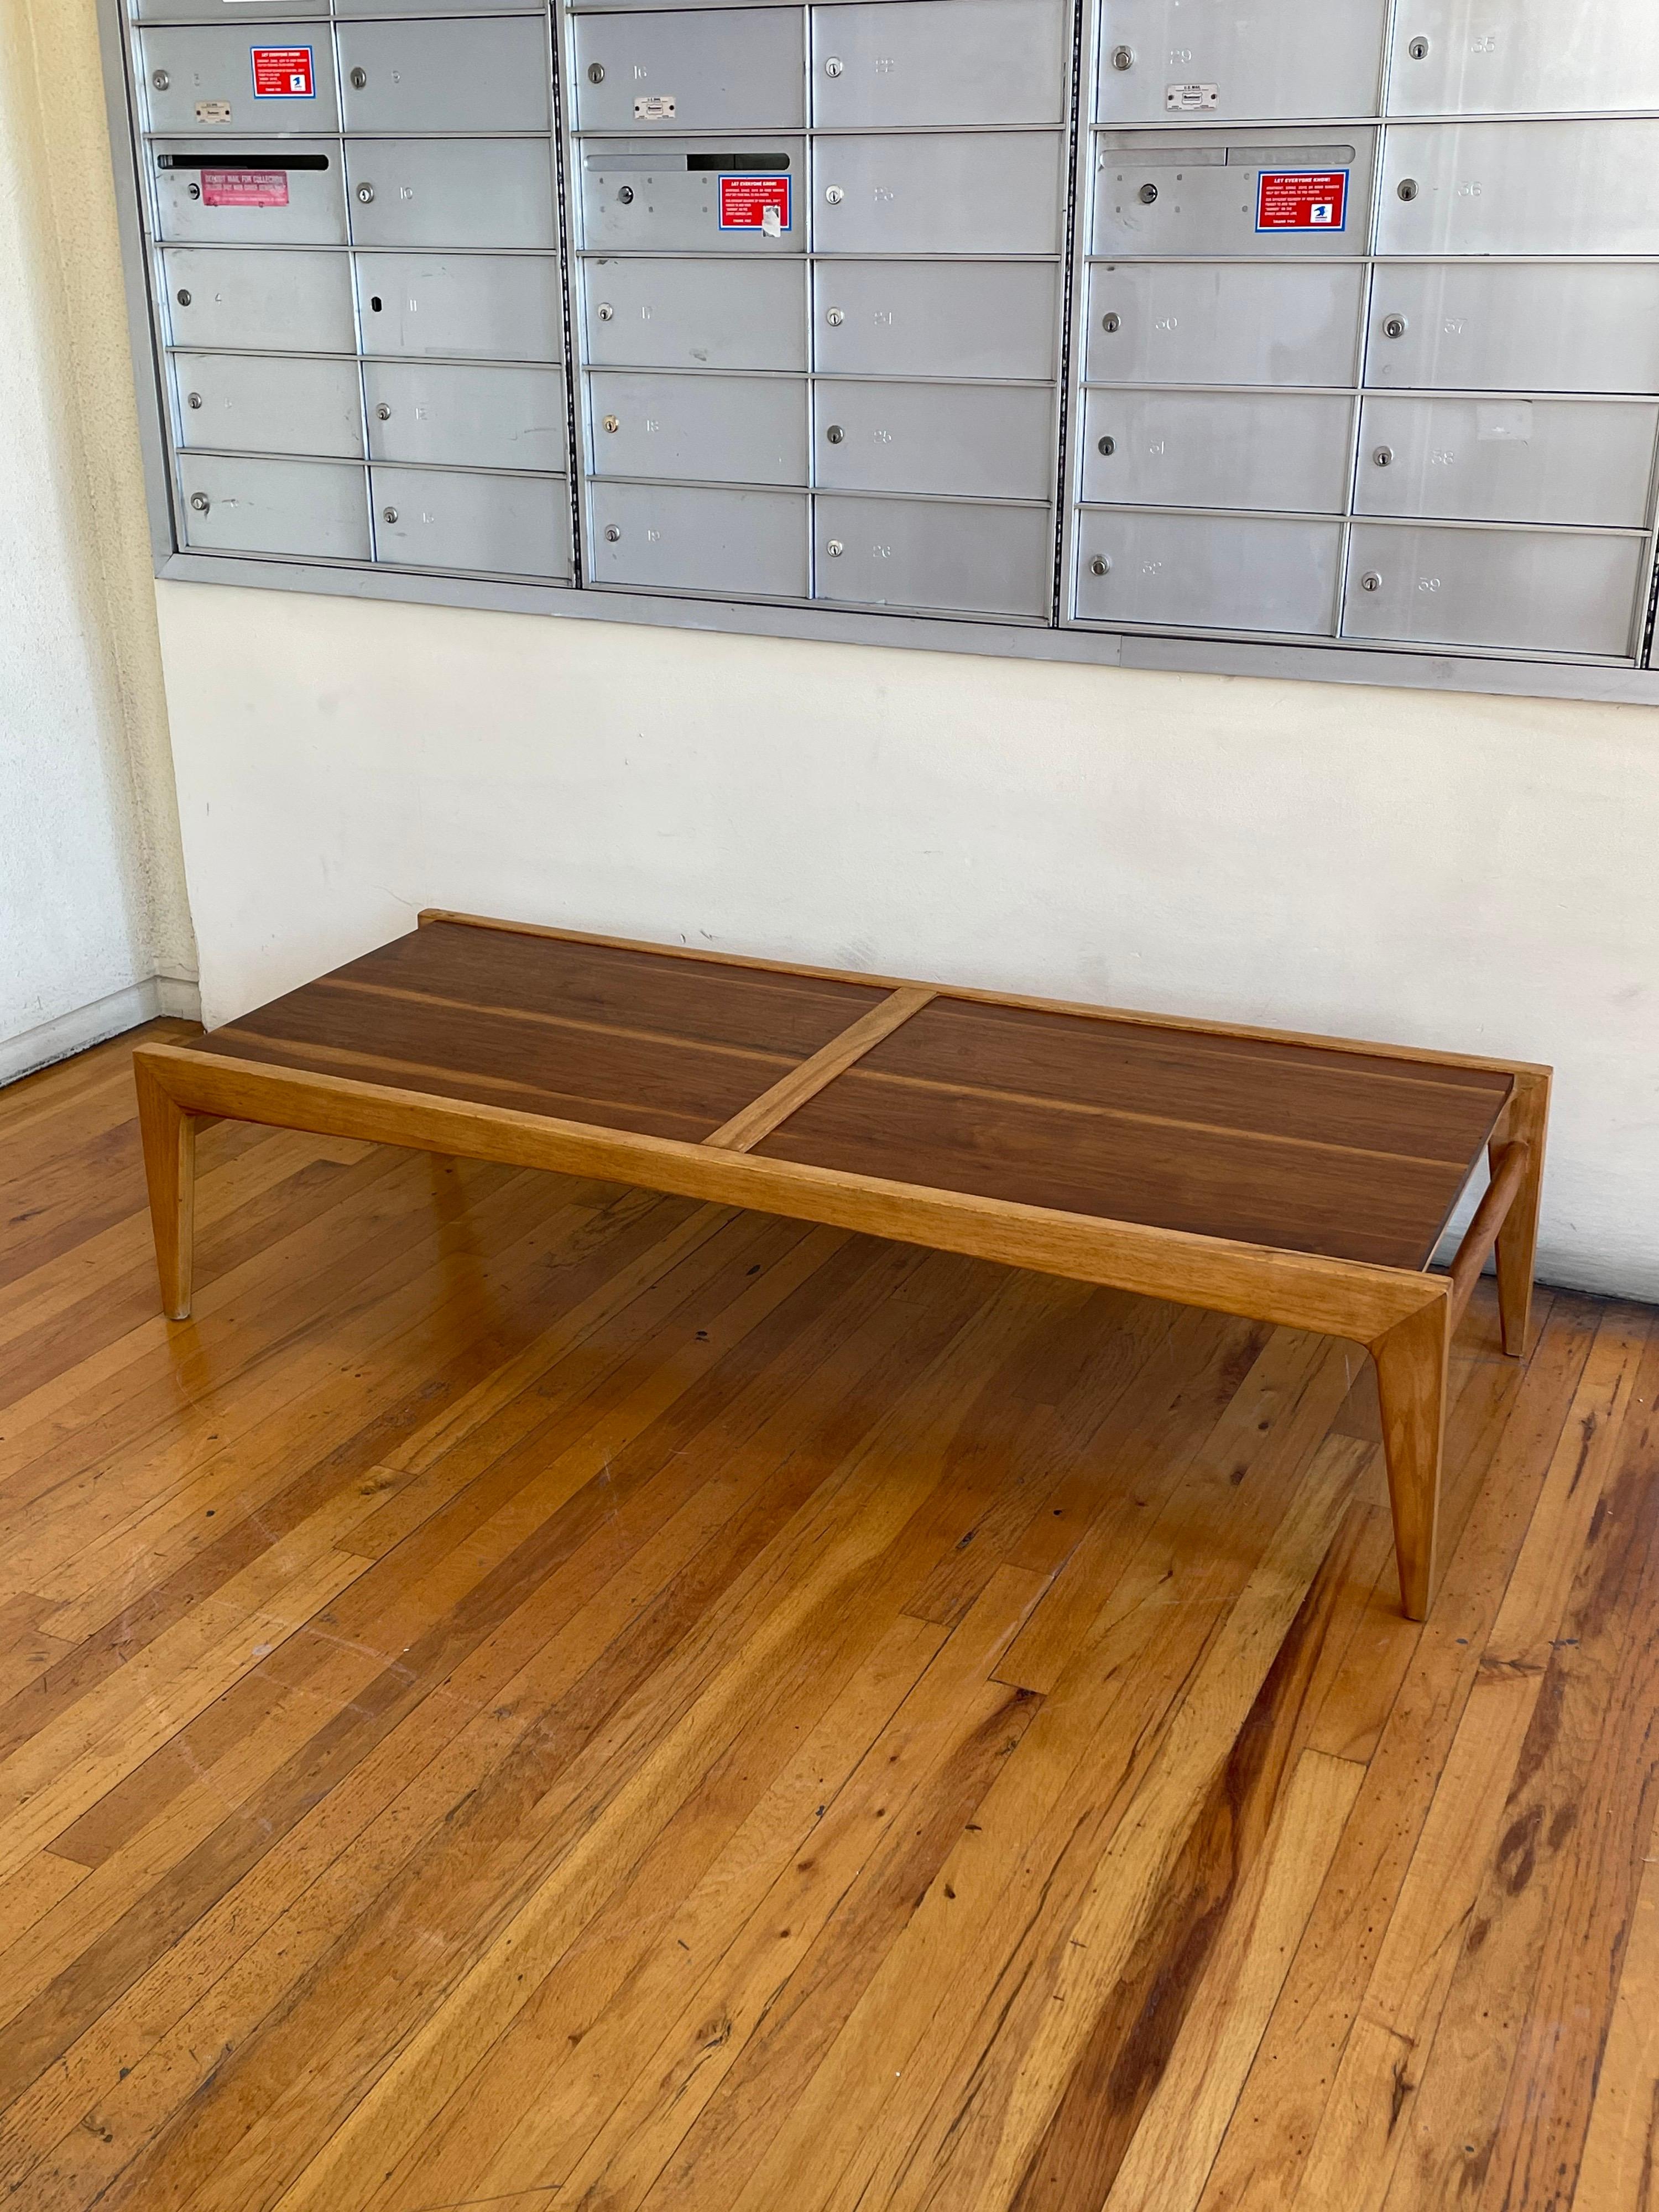 An architectural beautiful solid walnut and birch wood construction, coffee table by Drexel. circa the 1950s.